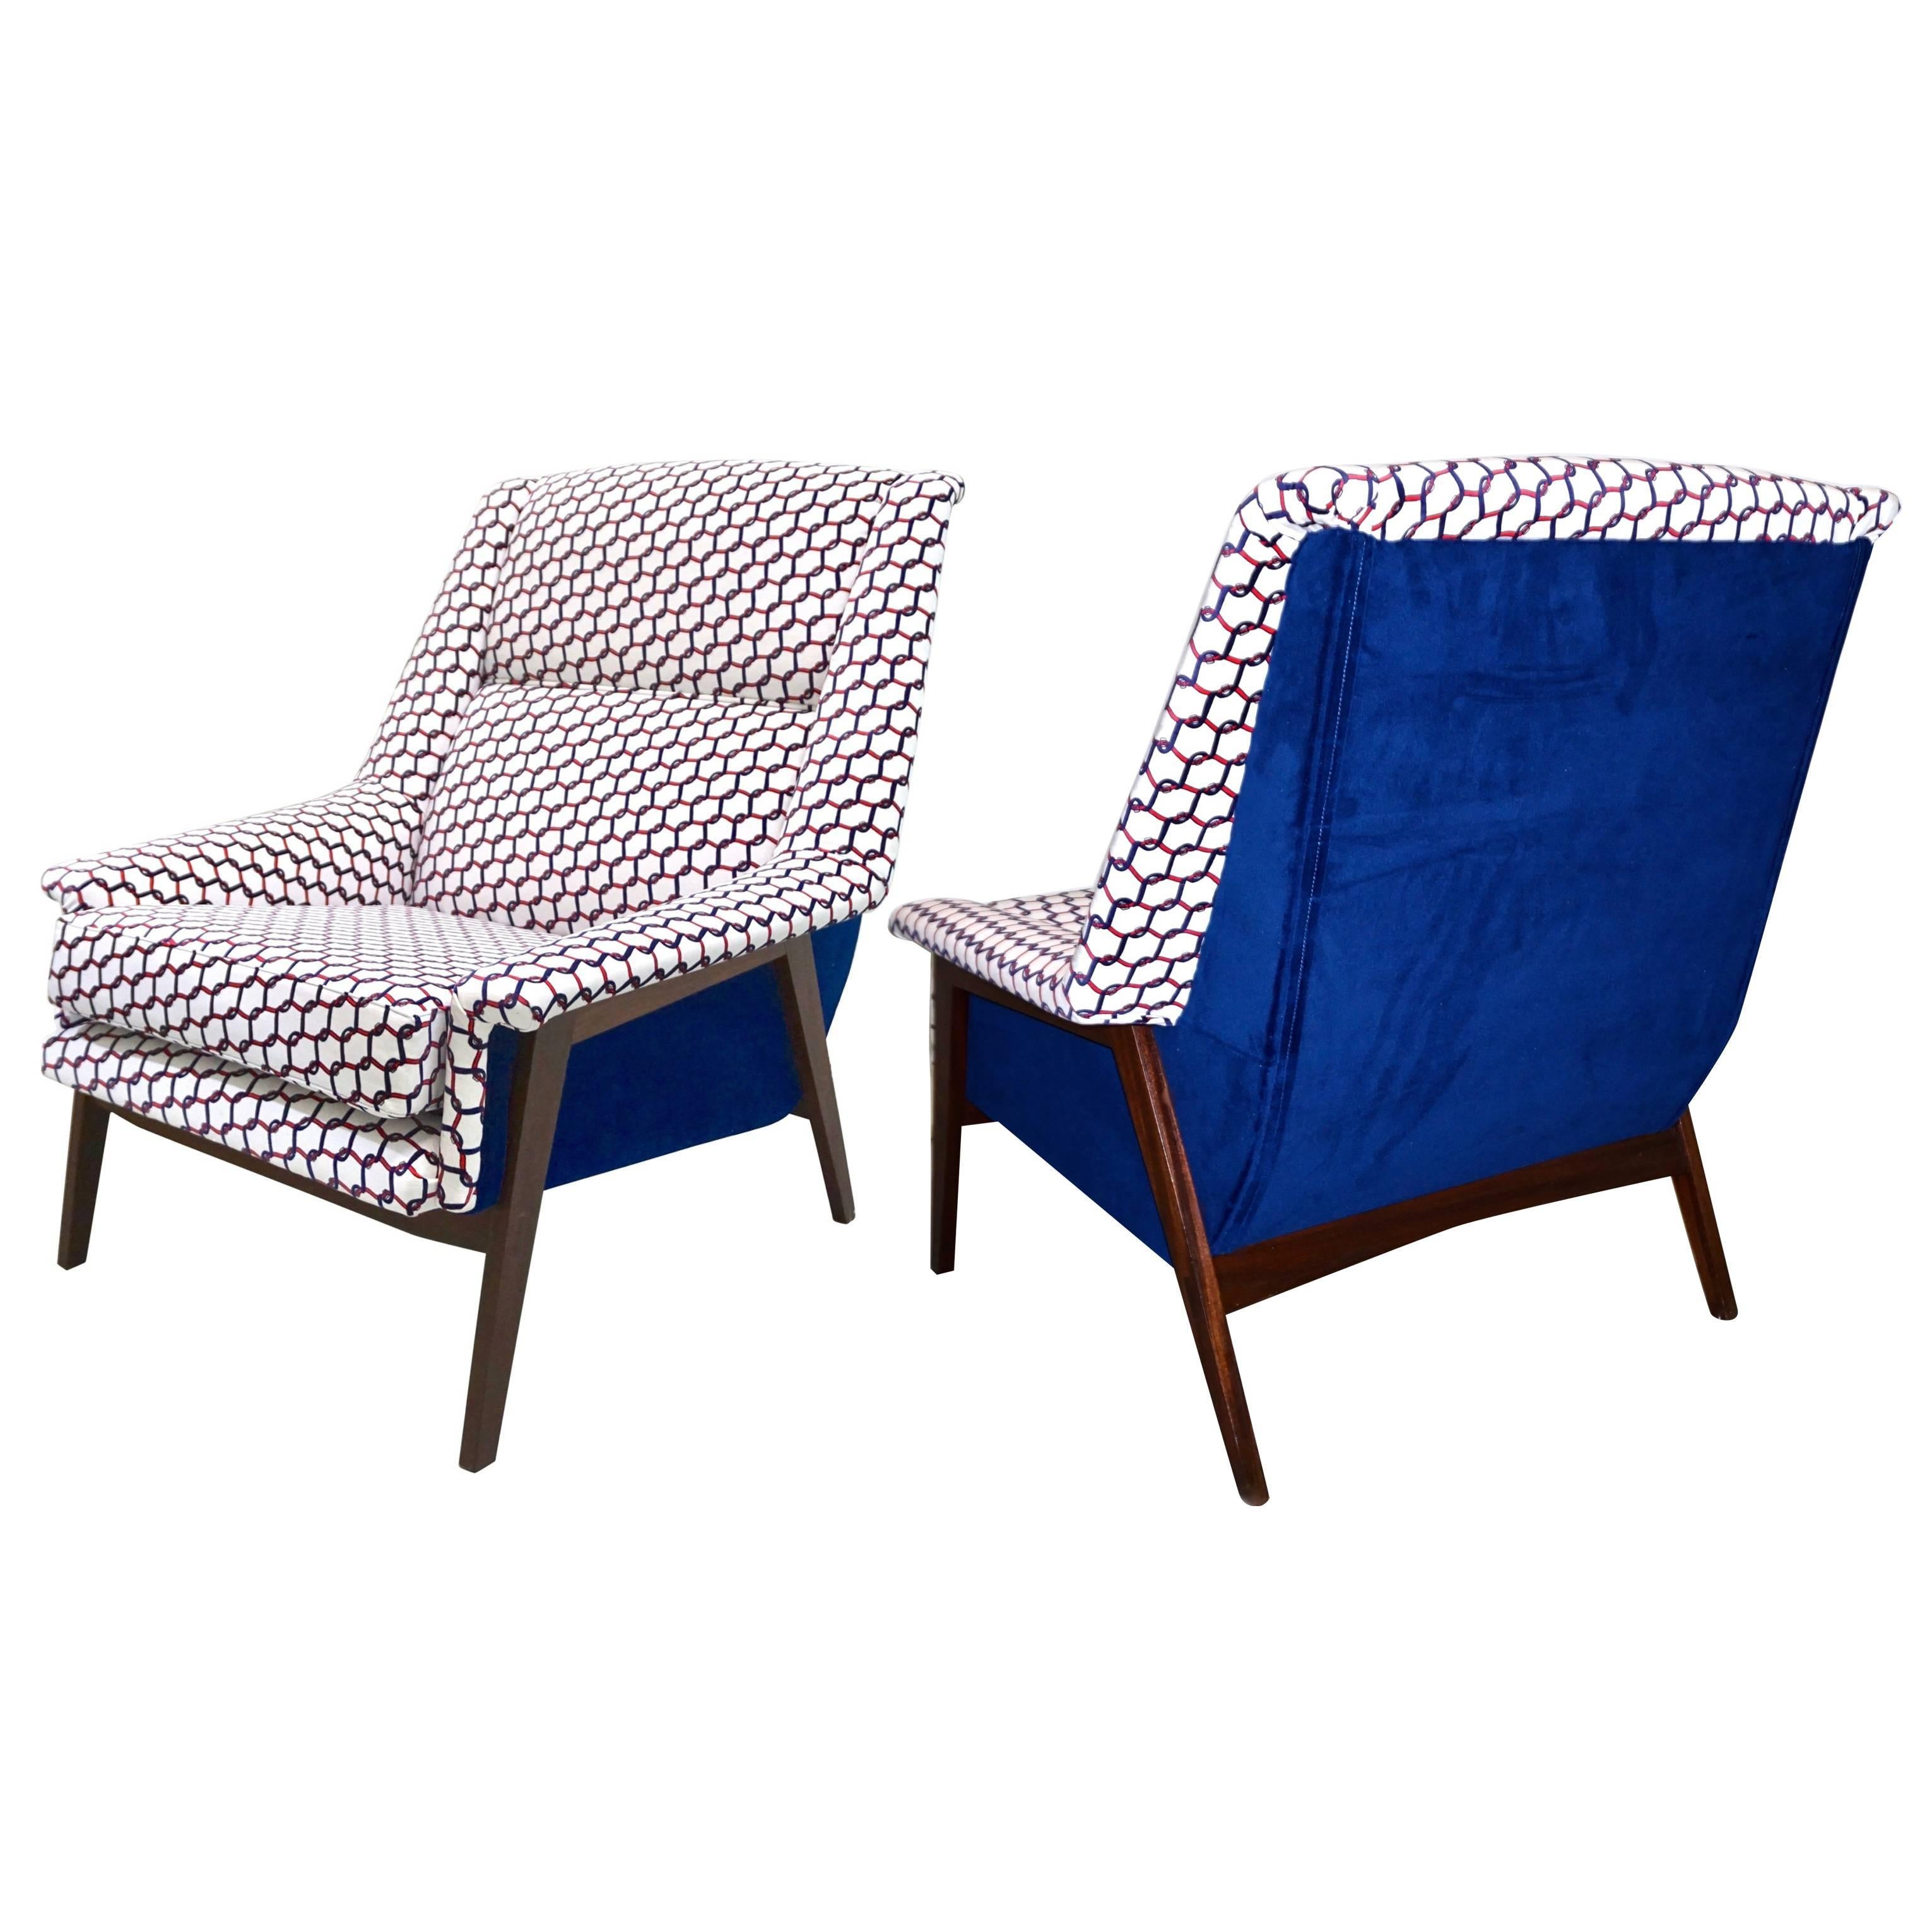 1960s Italian Pair of Vintage Walnut Armchairs in Cobalt Blue White Red Fabric